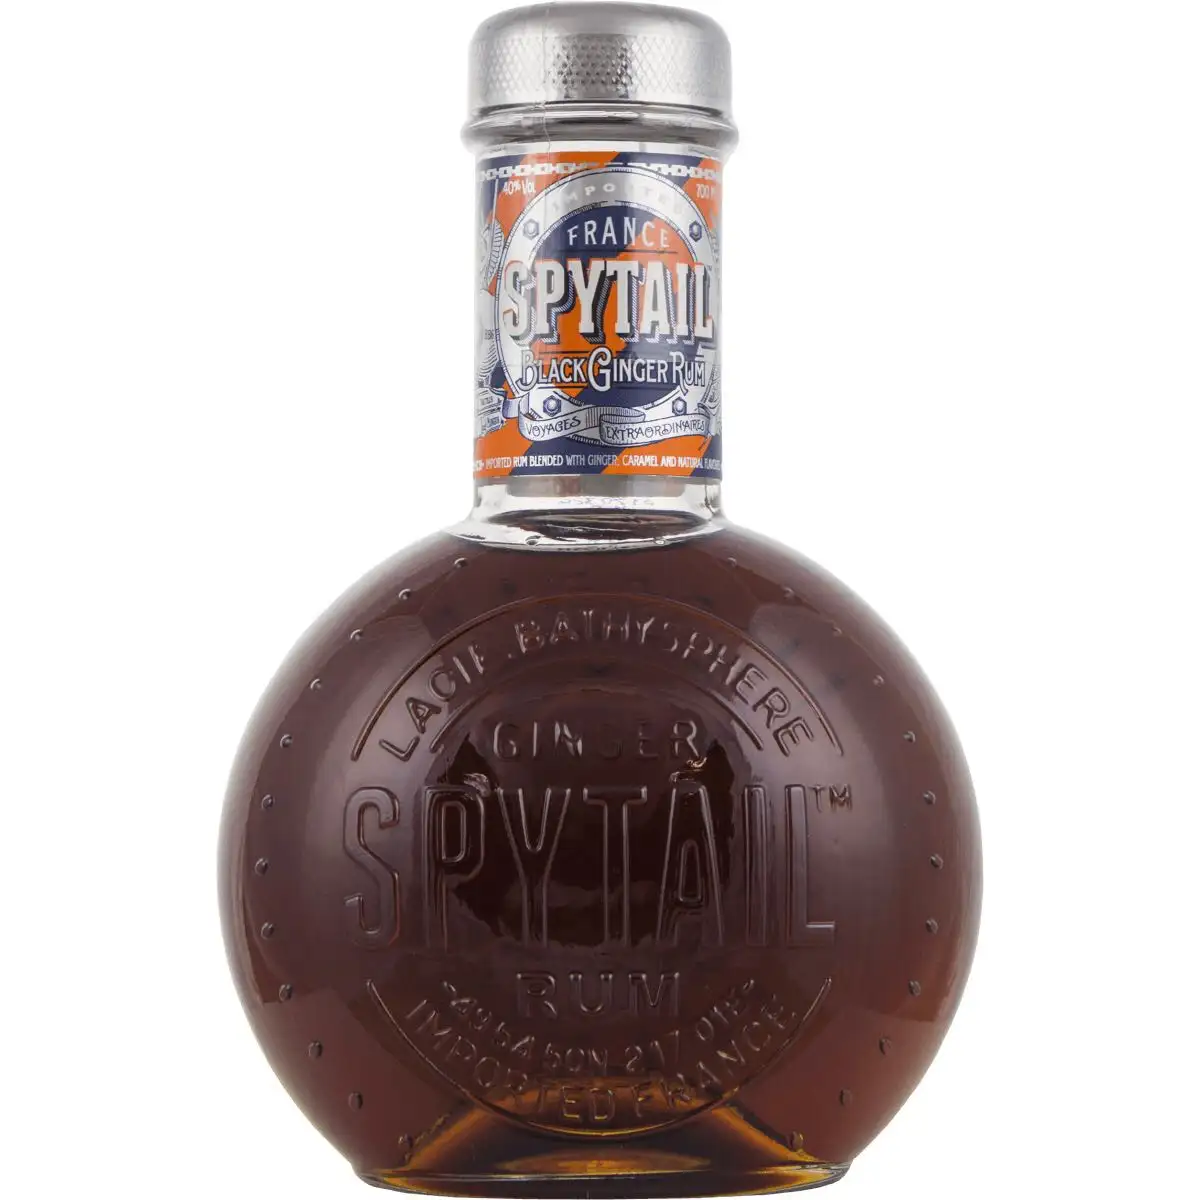 Image of the front of the bottle of the rum Spytail Black Ginger Rum